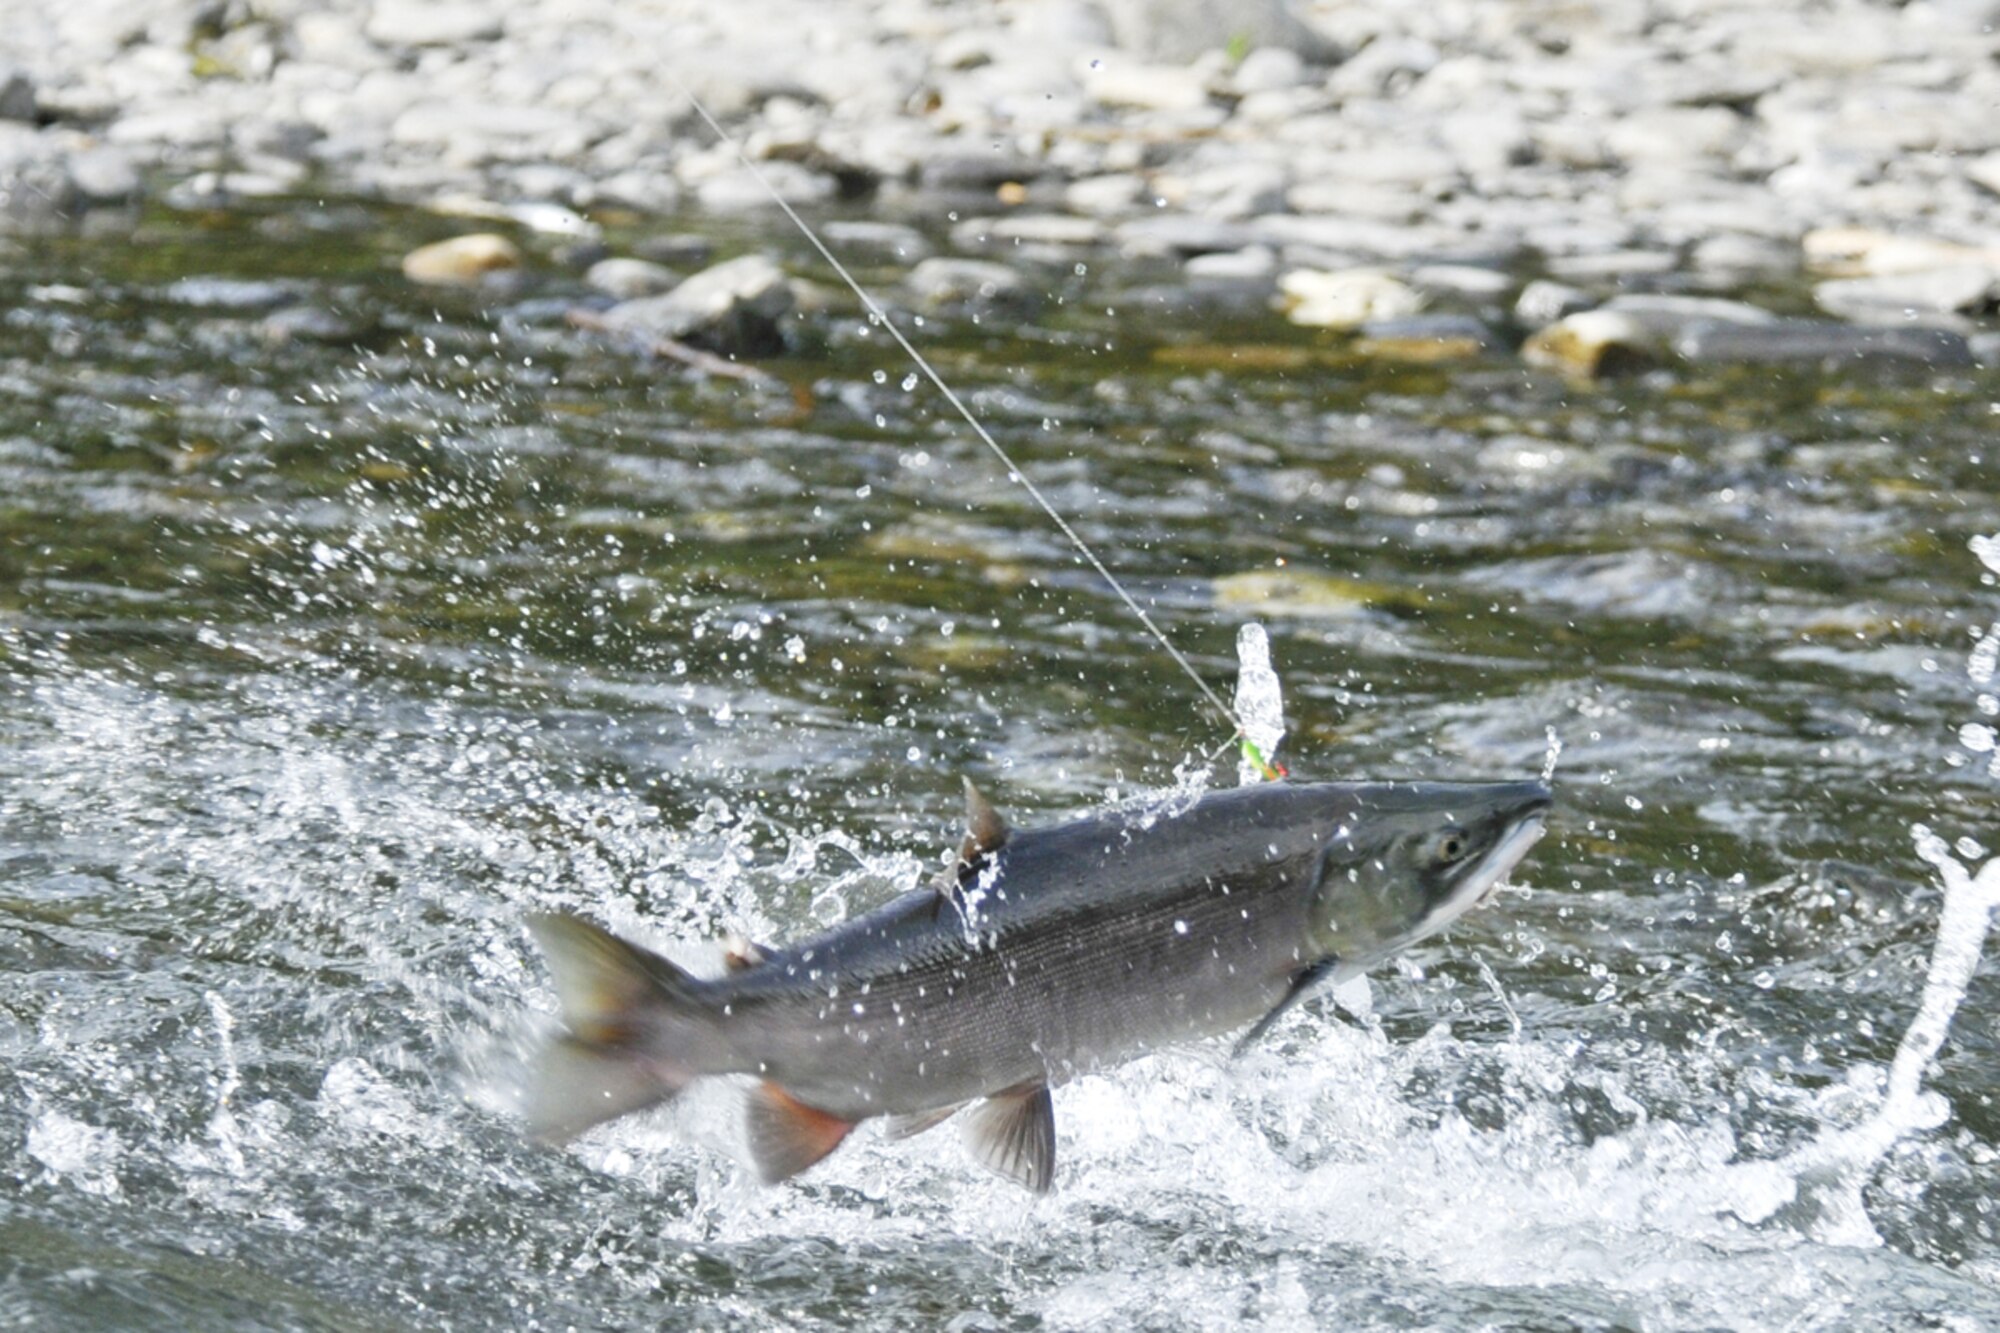 A red salmon from the Russian River, near Cooper’s Landing, Alaska, fi ghts the hook. Red or sockeye salmon are plentiful in the Russian and Kenai rivers during the summer and are famous for putting up a hard fi ght. Large sockeye can weigh up to 12 pounds and are known as the tastiest of salmon. (U.S. Air Force photo/Steve White)